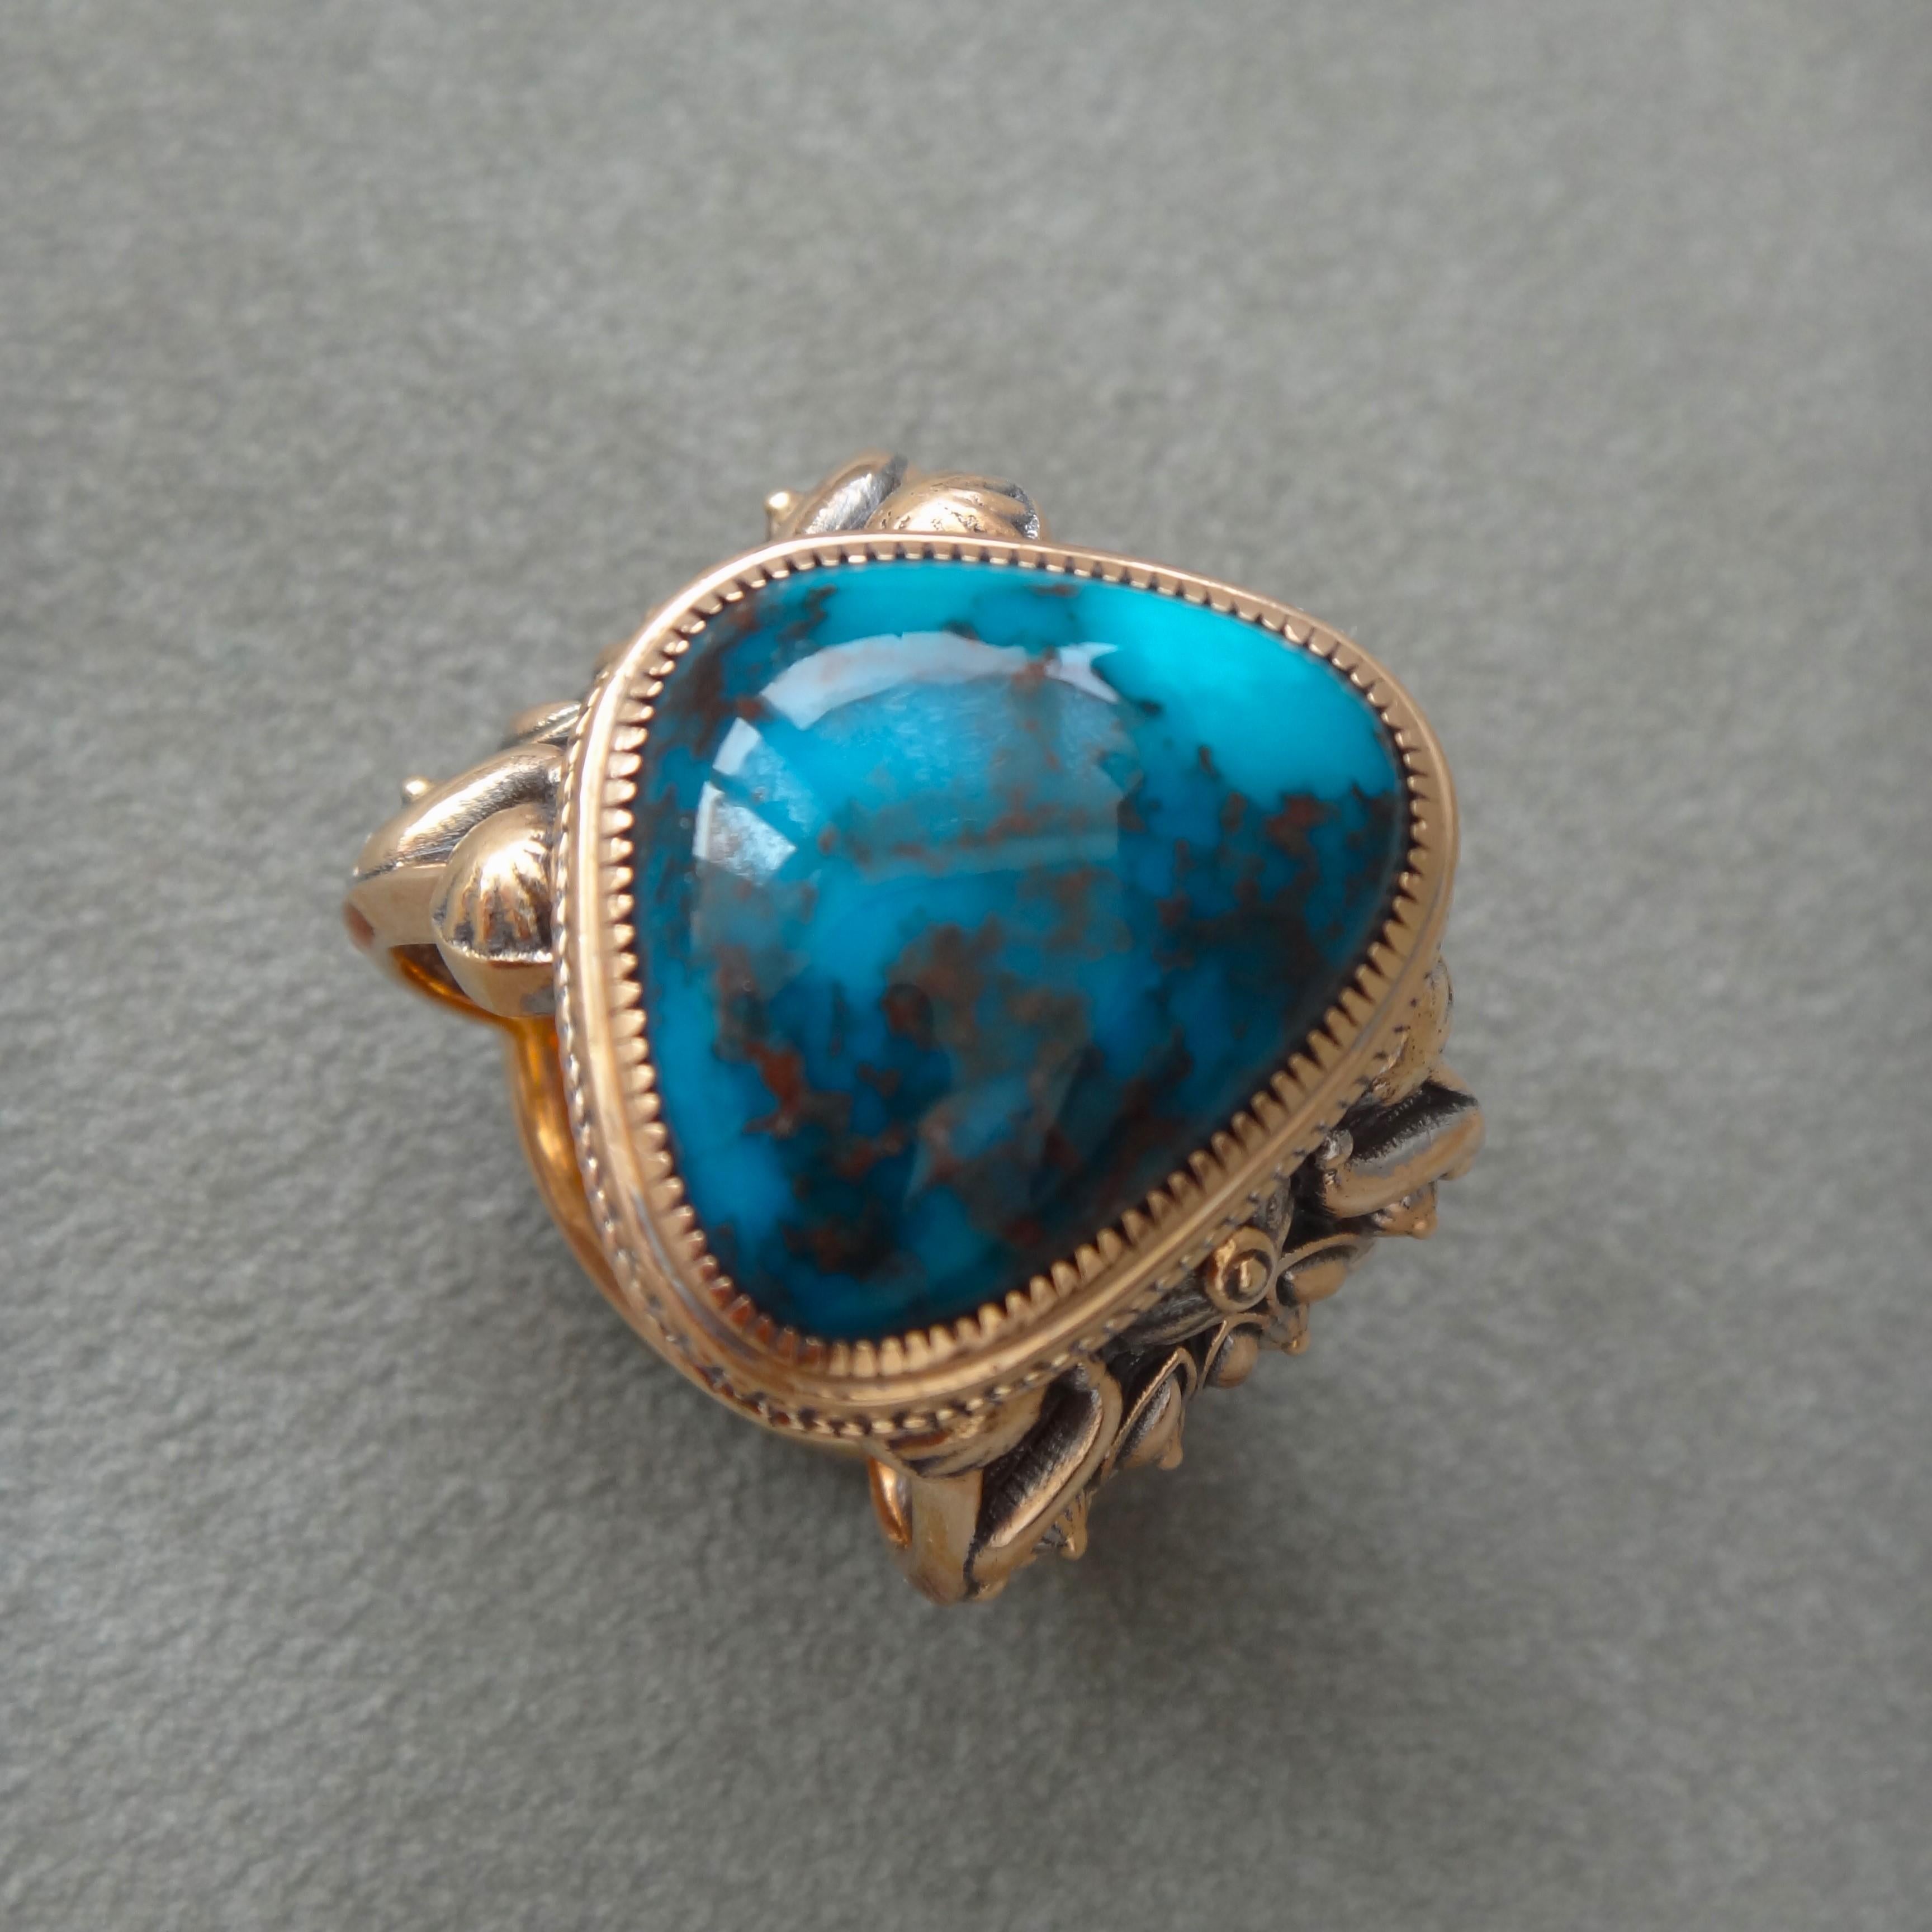 This top Bisbee ring is a beautiful piece of jewelry that will delight any Bisbee lover. The ring is crafted from 18K rose gold and set with a generous, stunning Gem Bisbee Turquoise. it is set in a classic oval cut that emphasizes its depth and